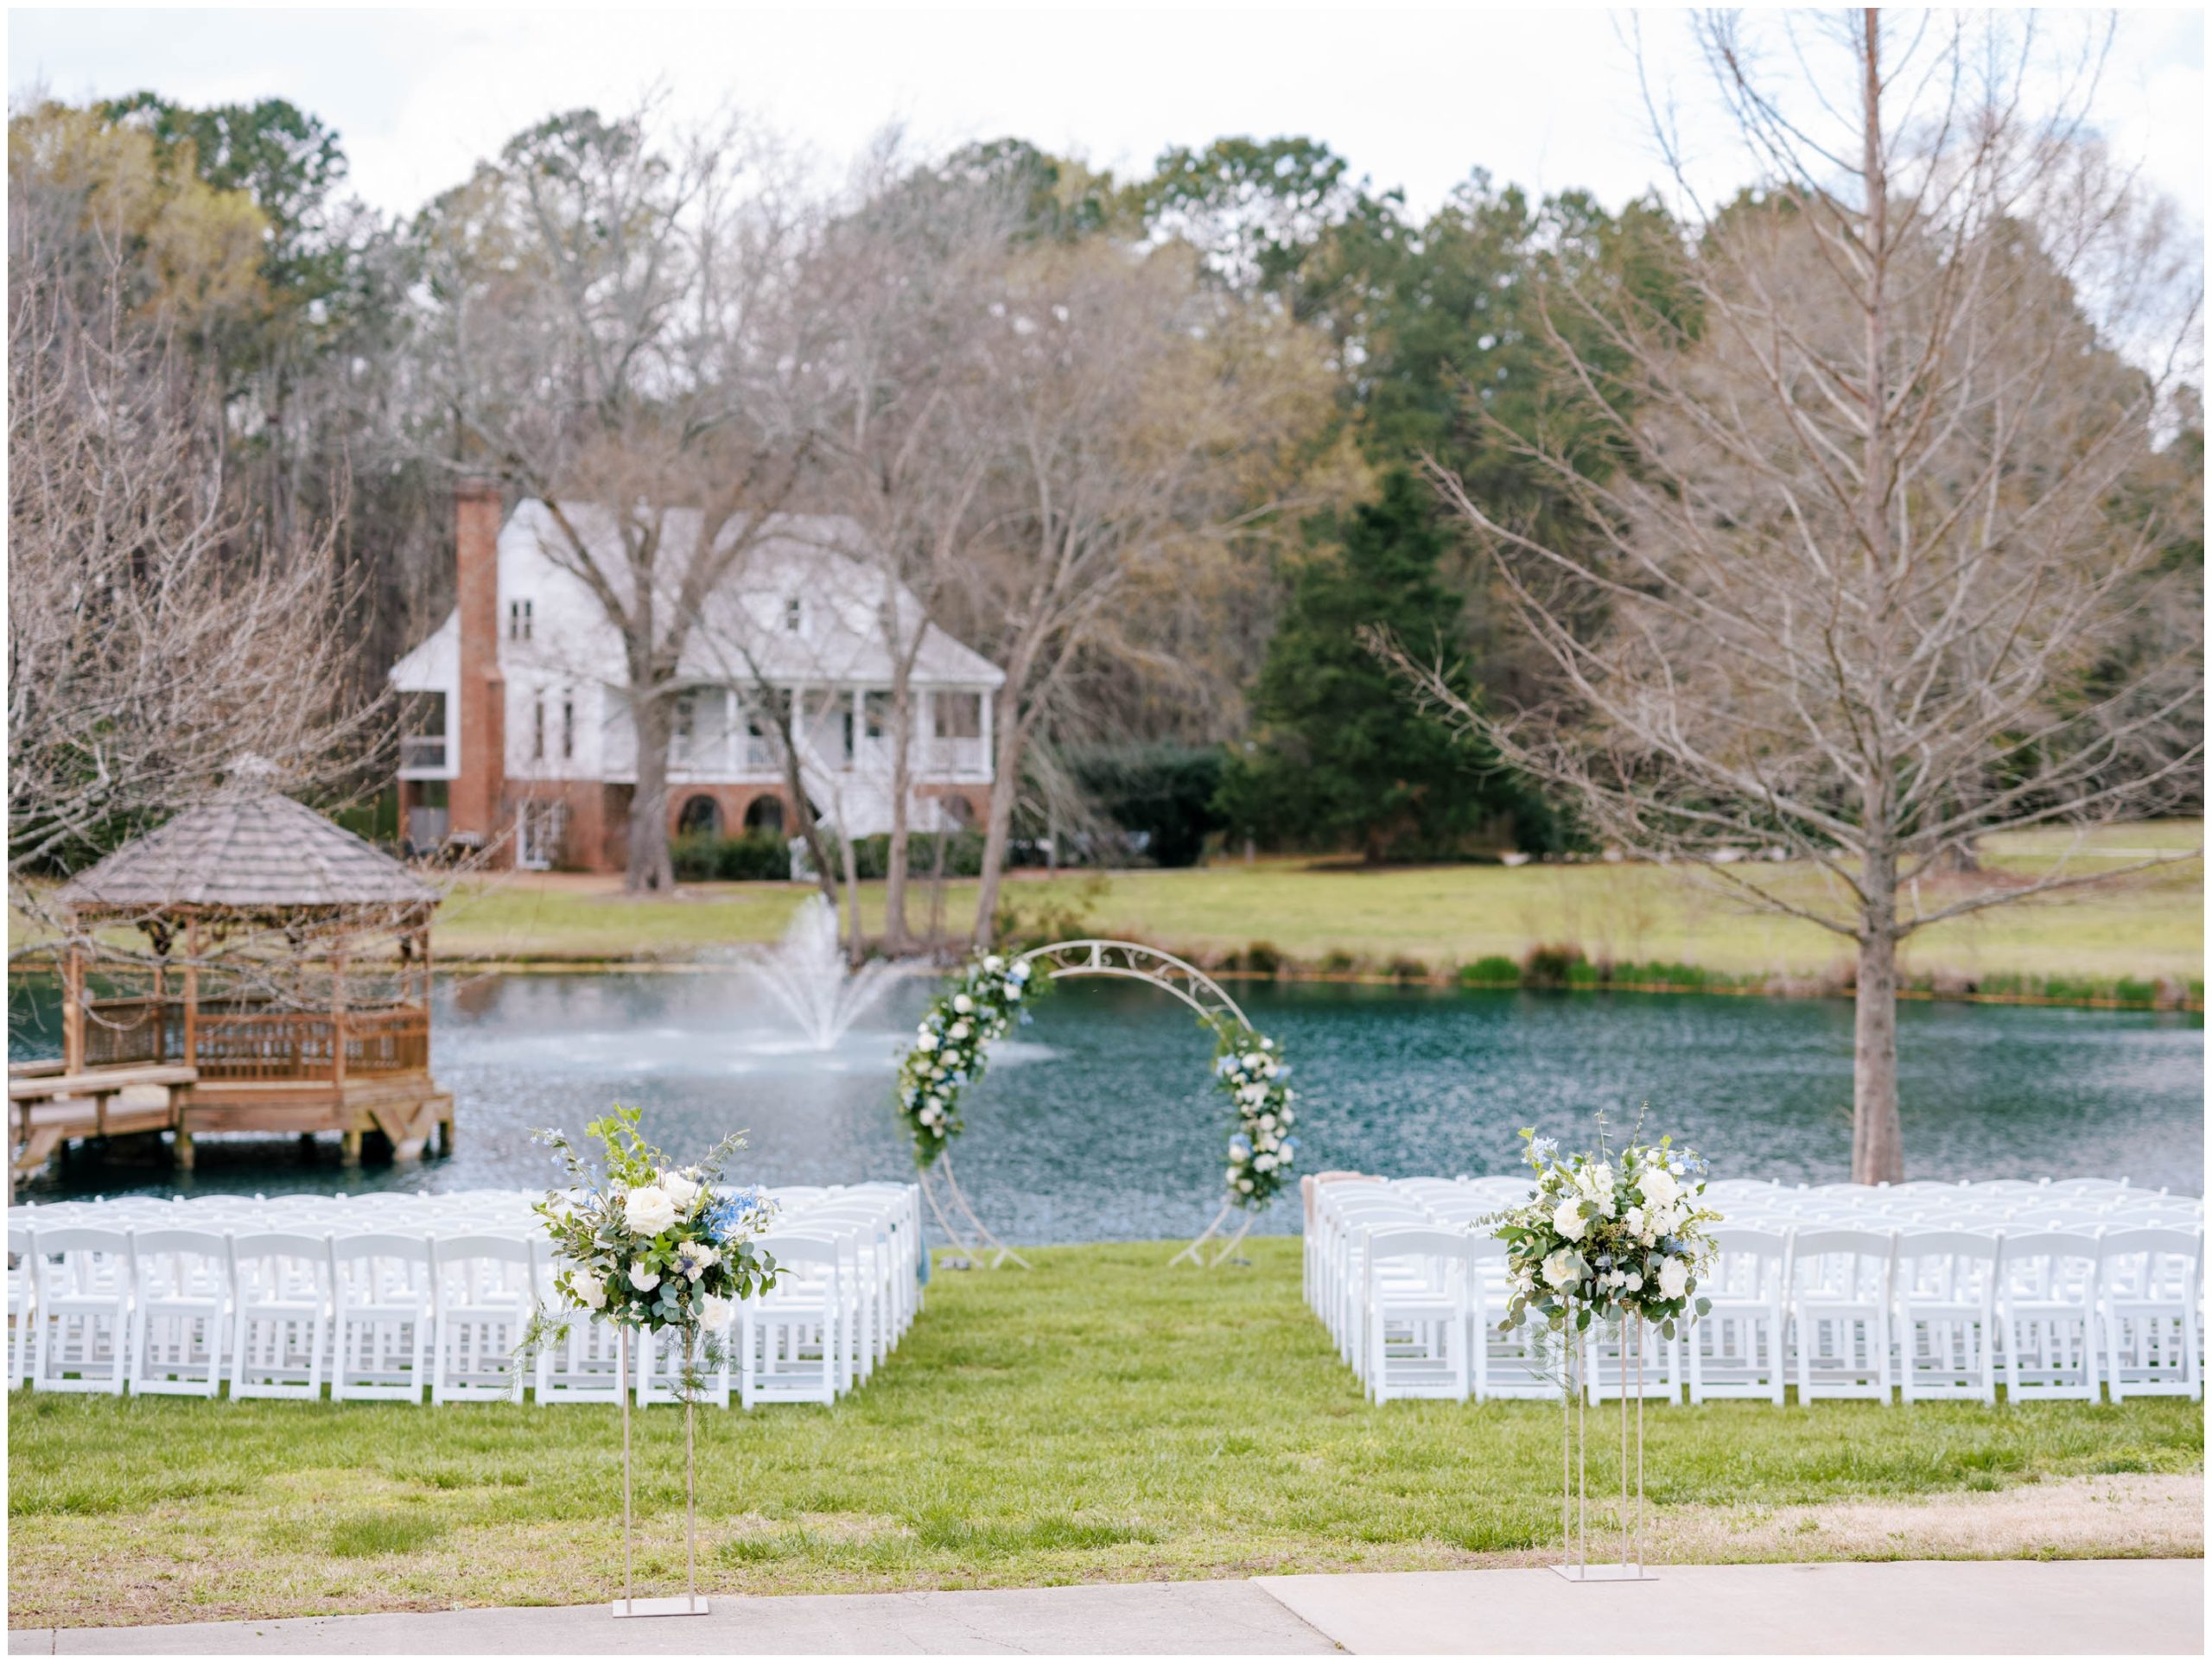 White chairs and an archway with blue and white florals for an outdoor spring wedding ceremony